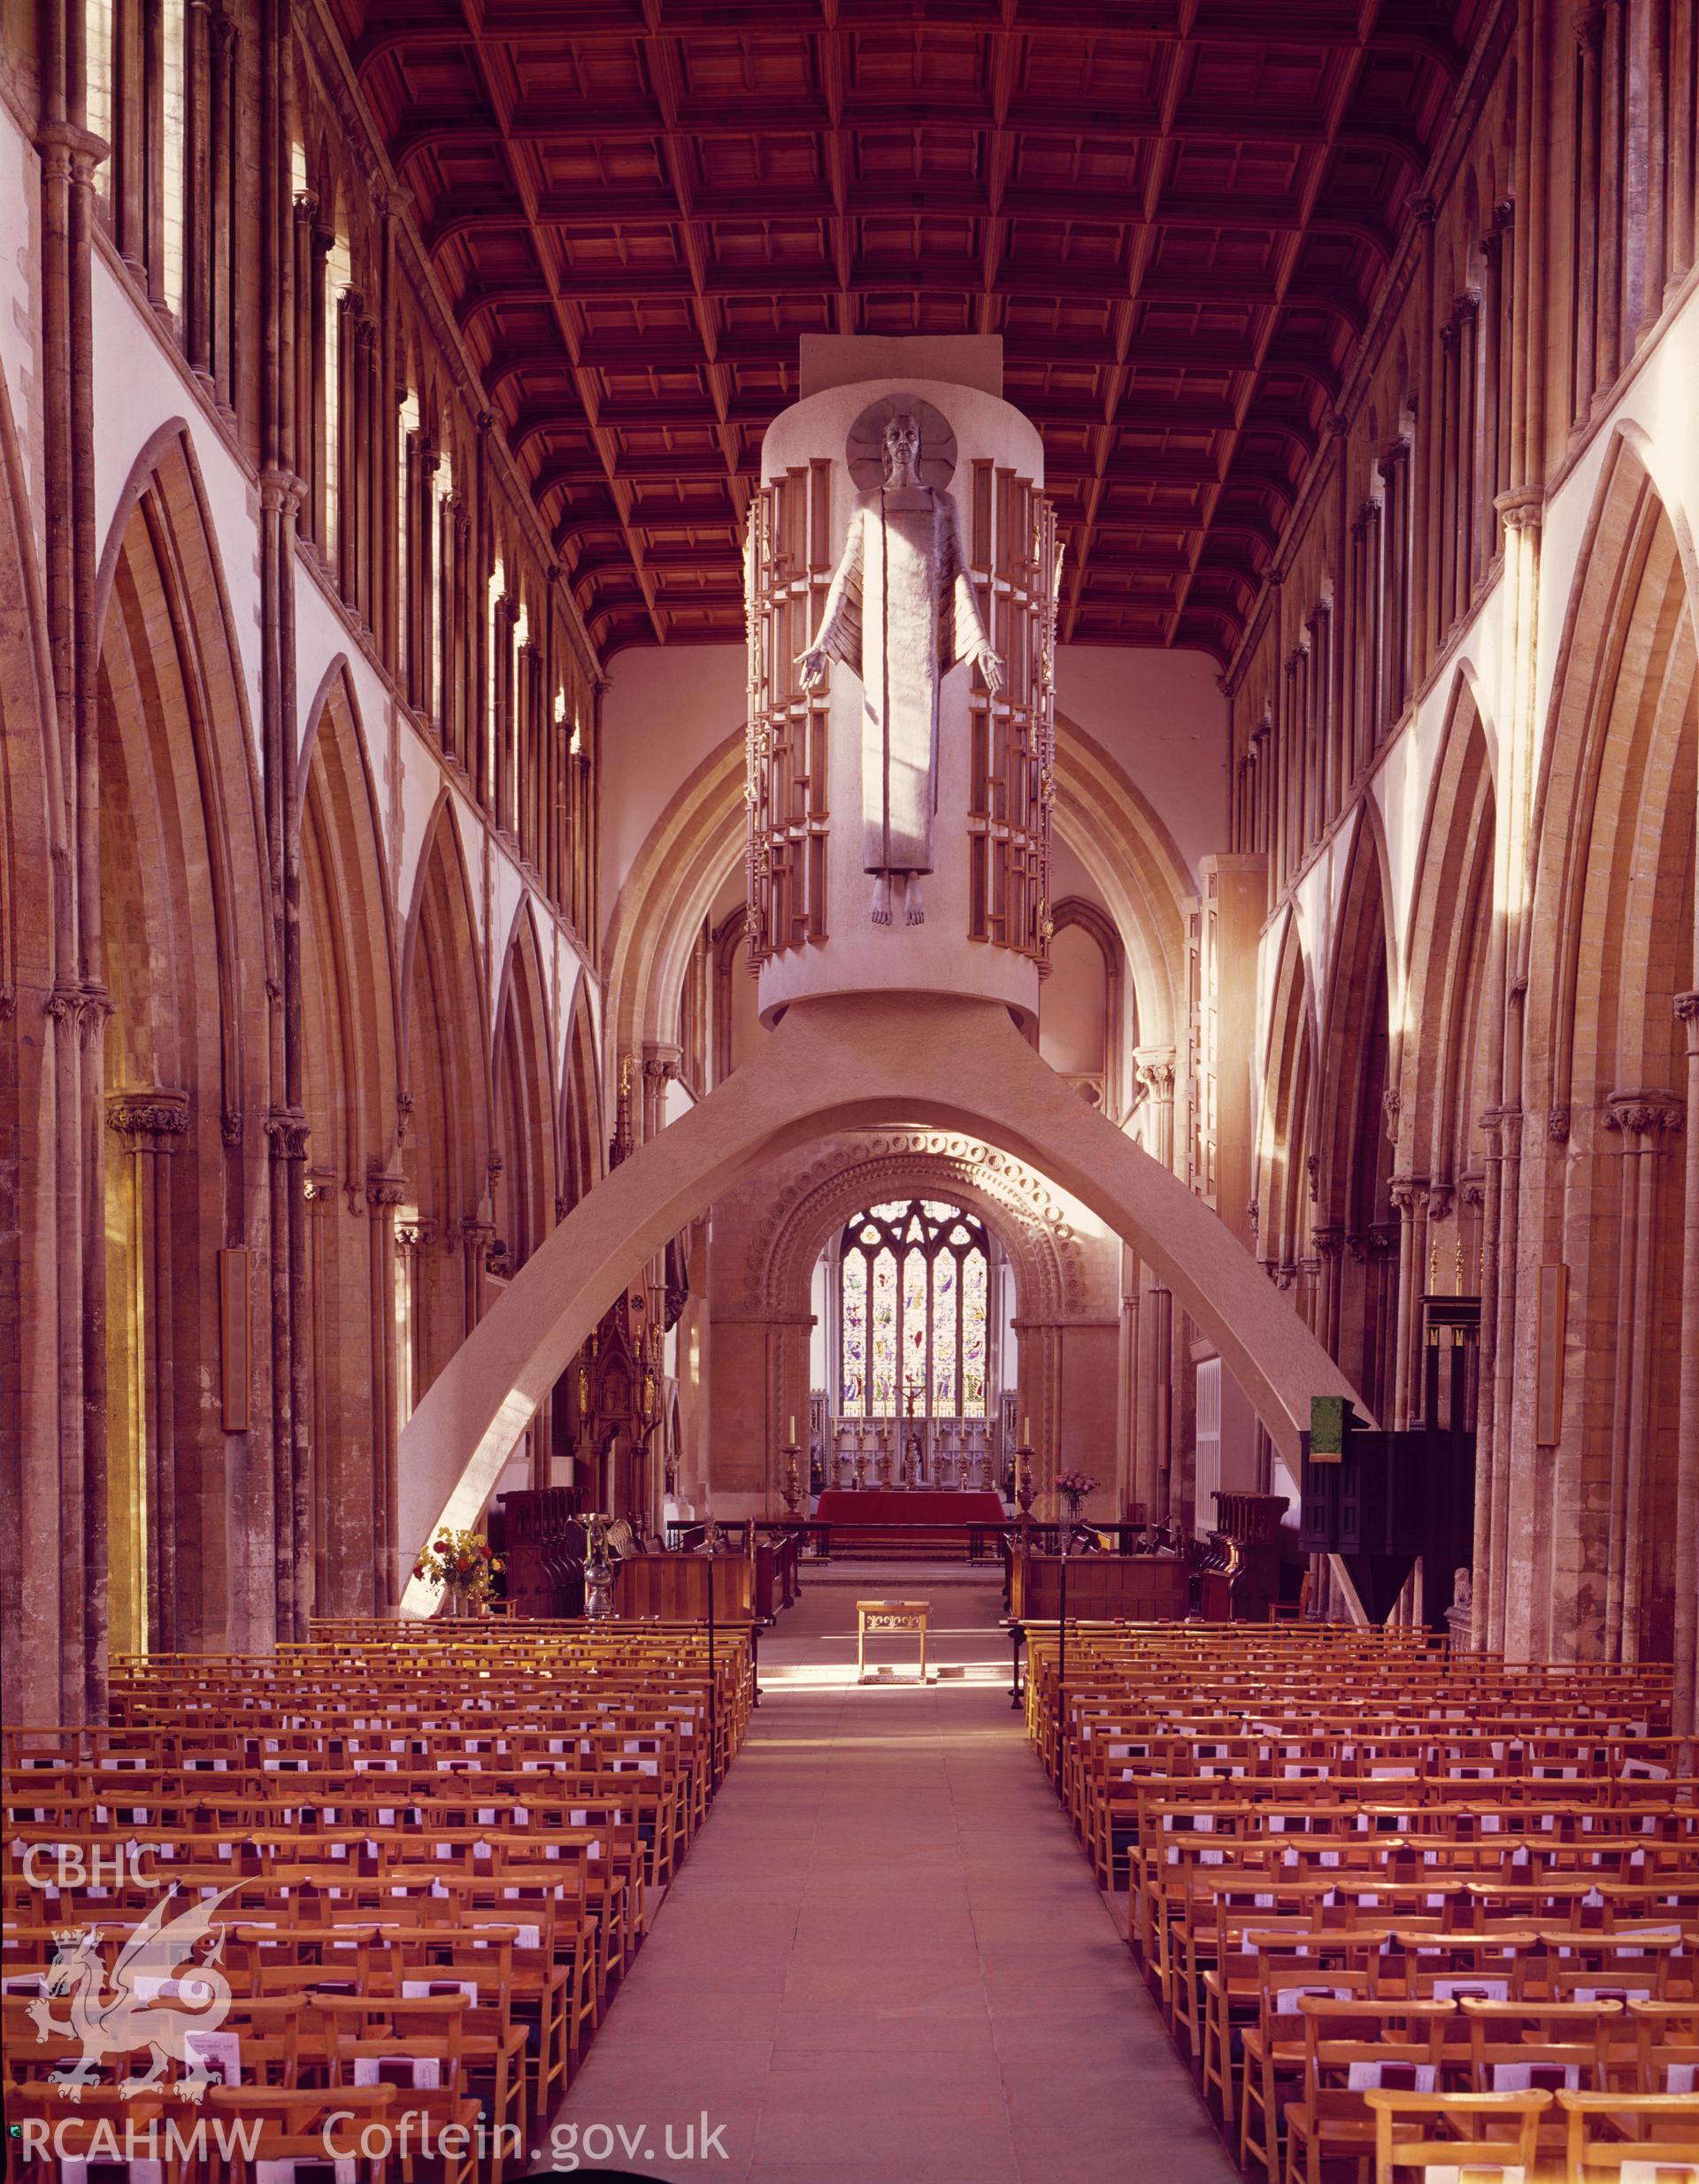 1 colour transparency showing view of interior of Llandaff cathedral with Epstein's 'Risen Christ' centre-piece; collated by the former Central Office of Information.